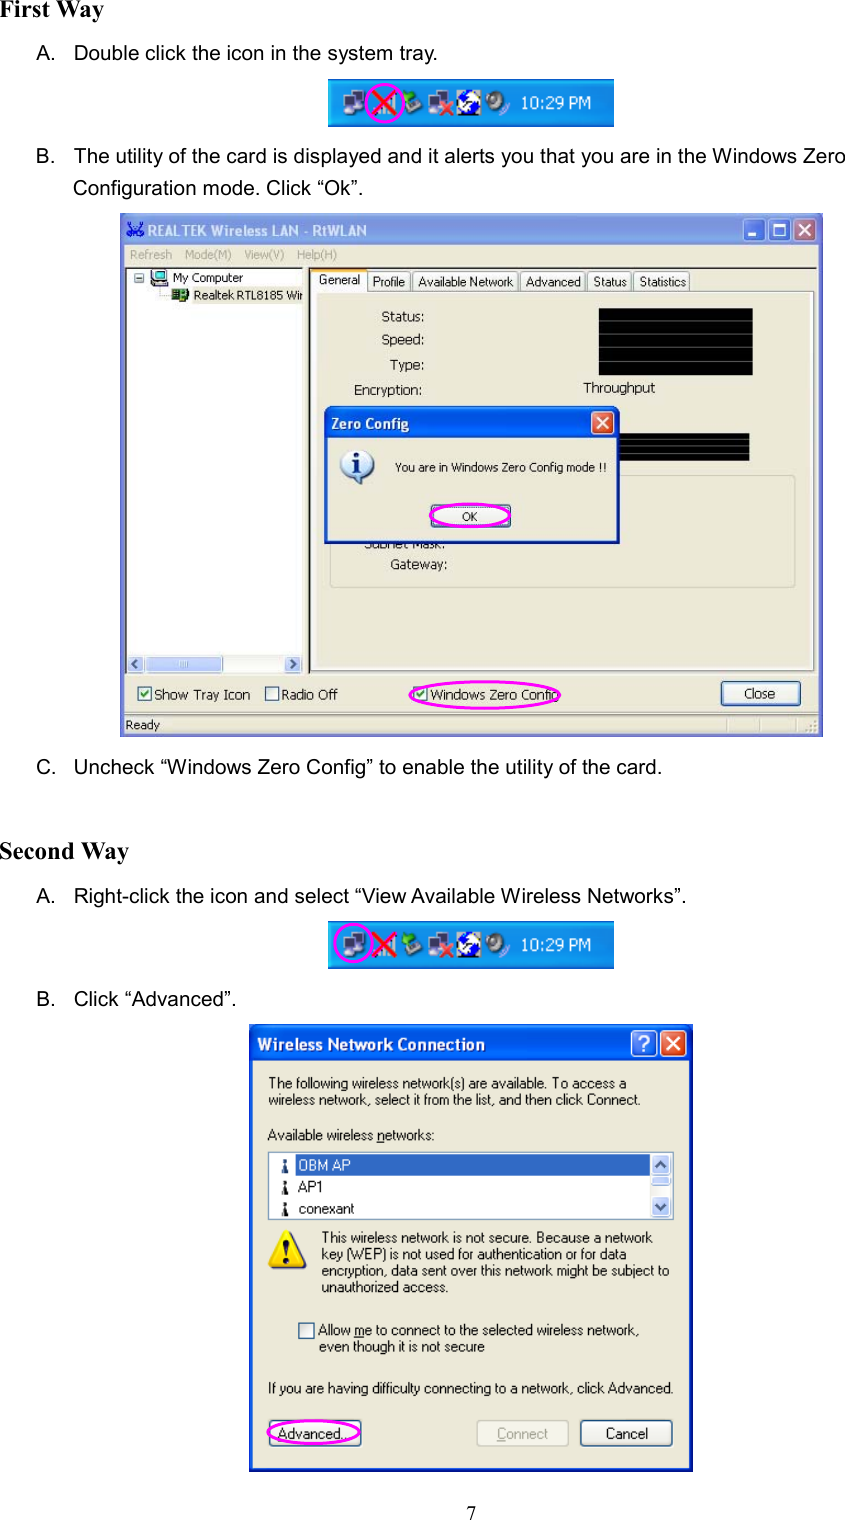  7 First Way A.  Double click the icon in the system tray.  B.  The utility of the card is displayed and it alerts you that you are in the Windows Zero Configuration mode. Click “Ok”.  C.  Uncheck “Windows Zero Config” to enable the utility of the card.  Second Way A.  Right-click the icon and select “View Available Wireless Networks”.  B. Click “Advanced”.  